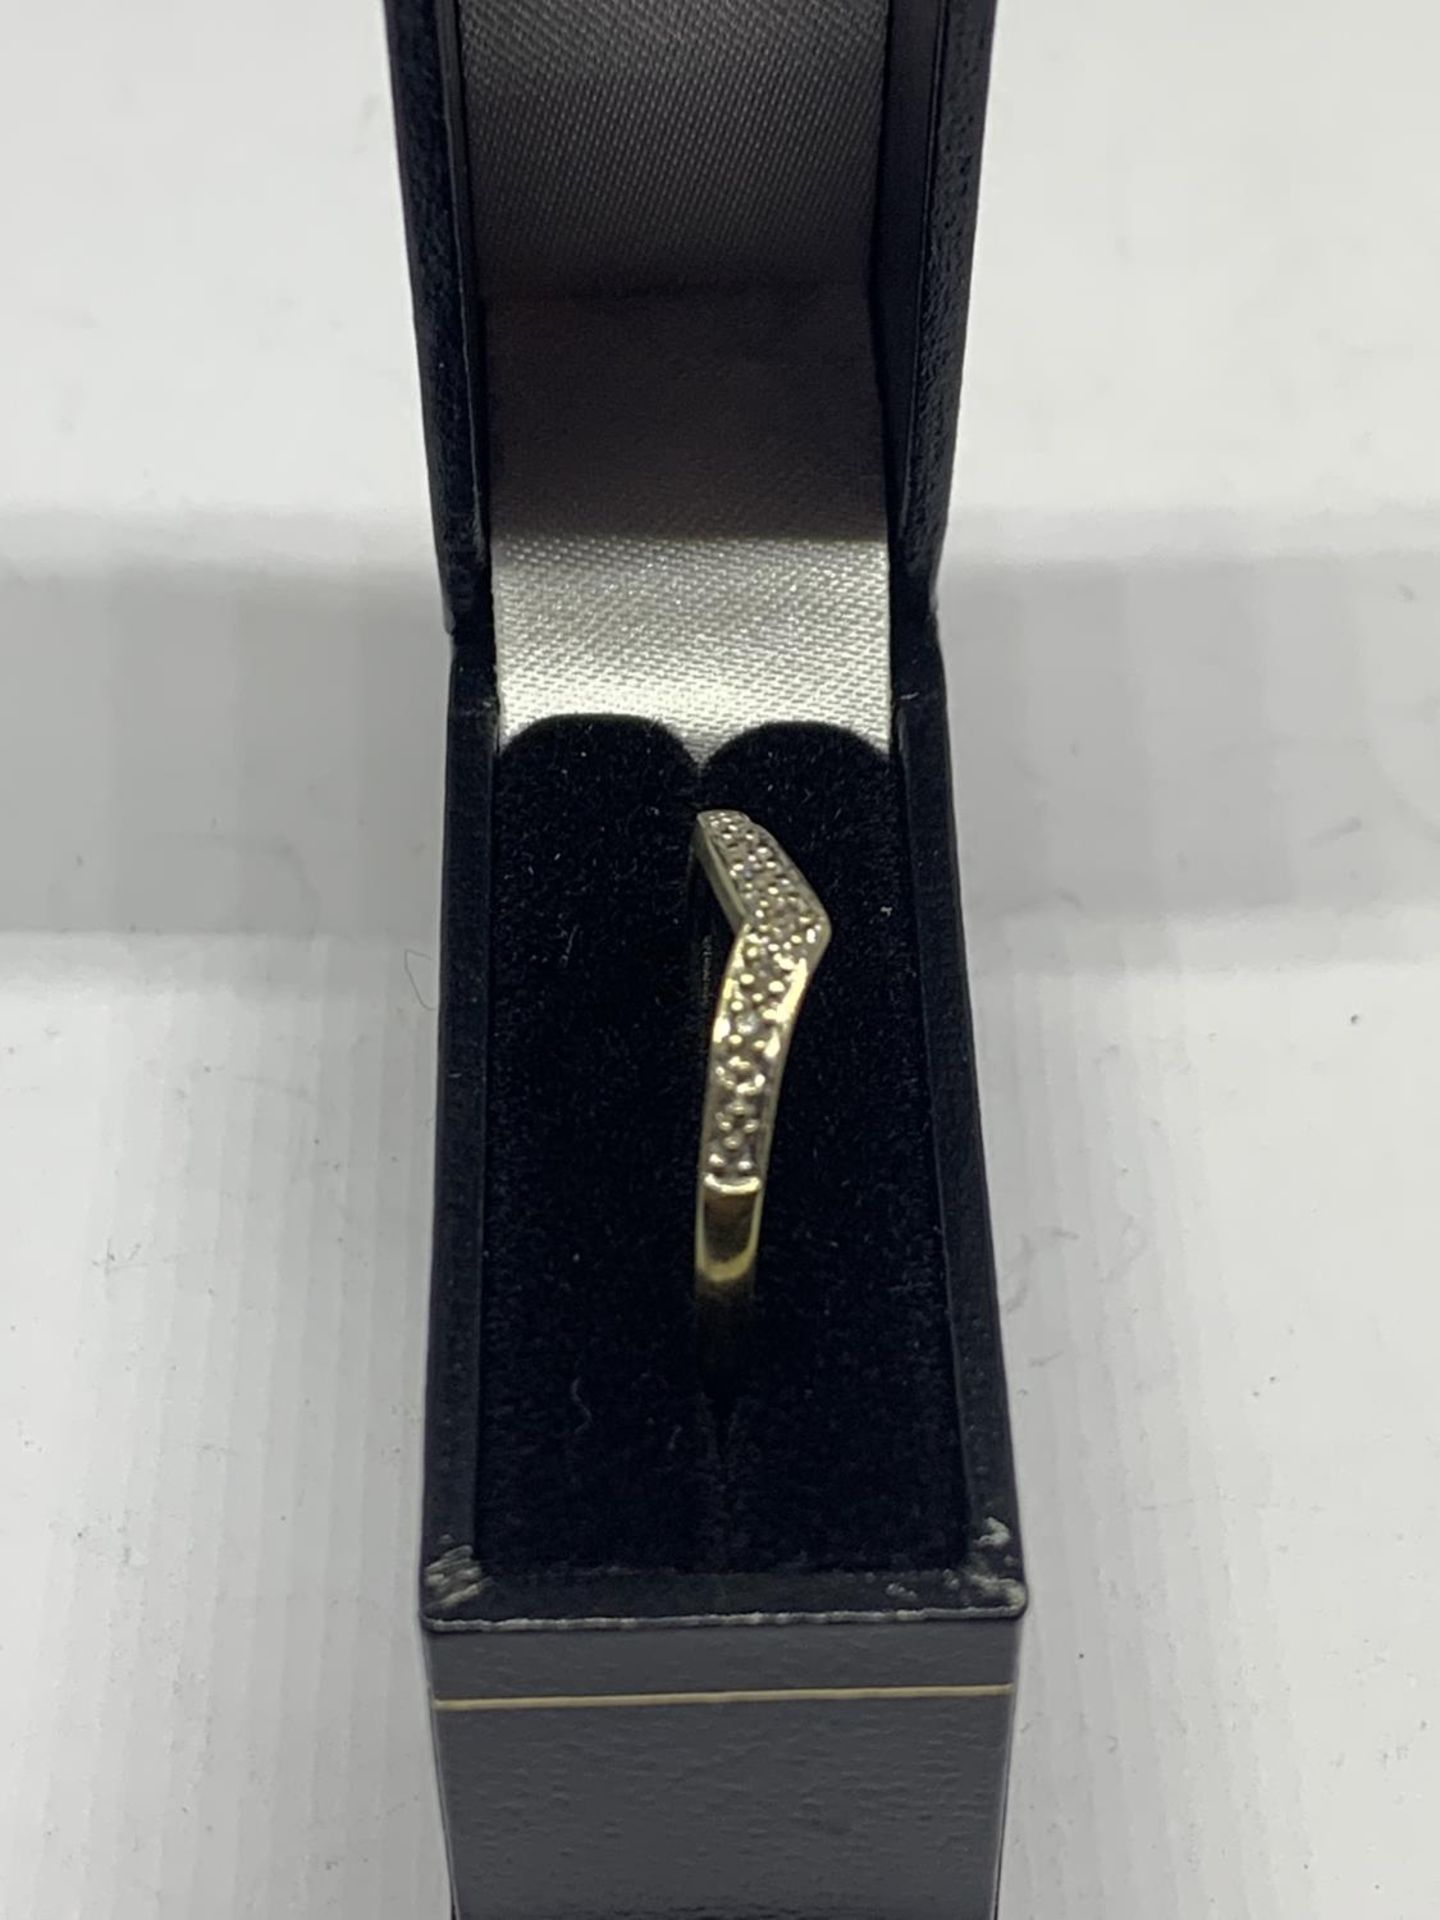 A 9 CARAT GOLD RING WITH DIAMONDS IN A WISHBONE DESIGN SIZE O WITH A PRESENTATION BOX - Image 2 of 5